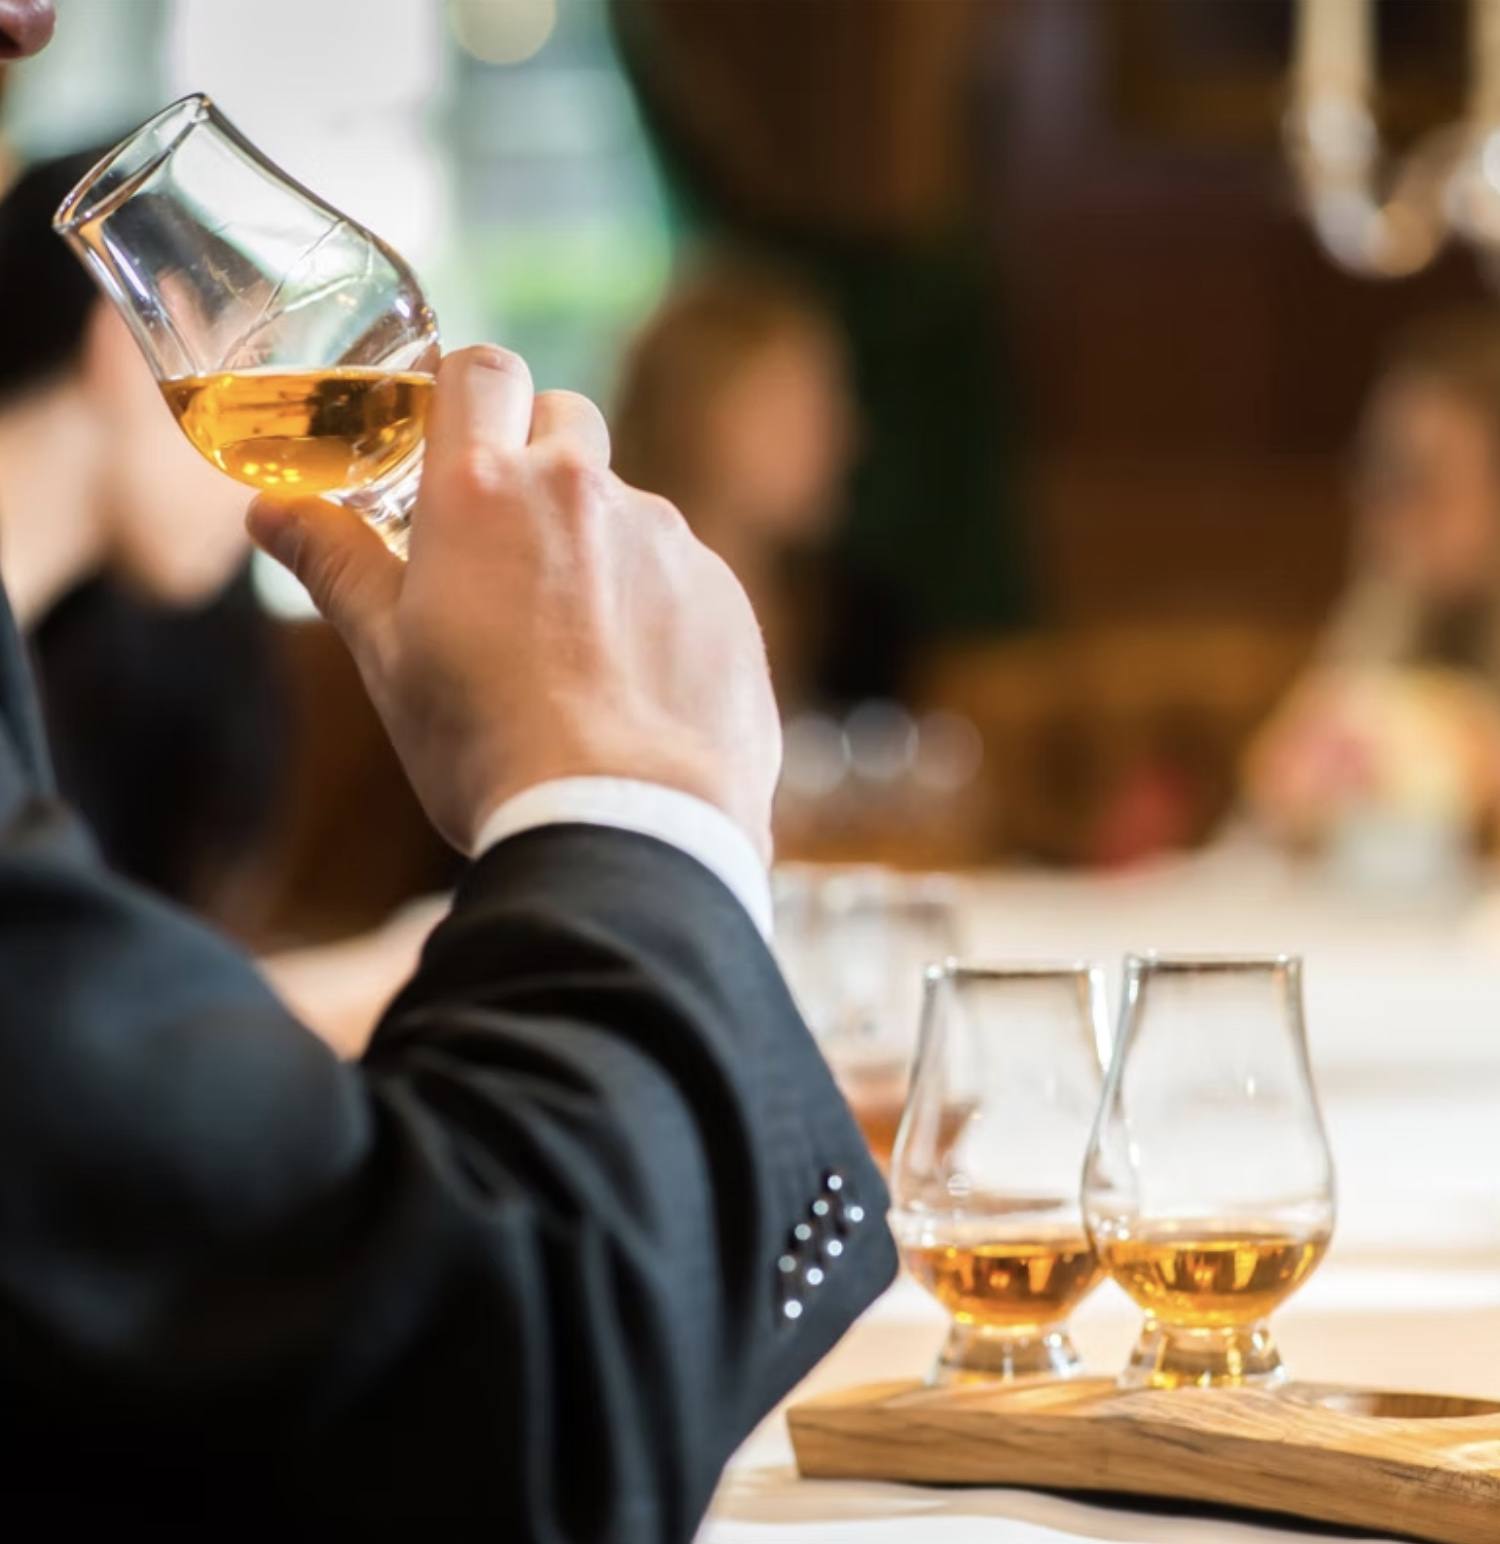 Whisky Tasting For 2 With 5* Meal At The Rubens